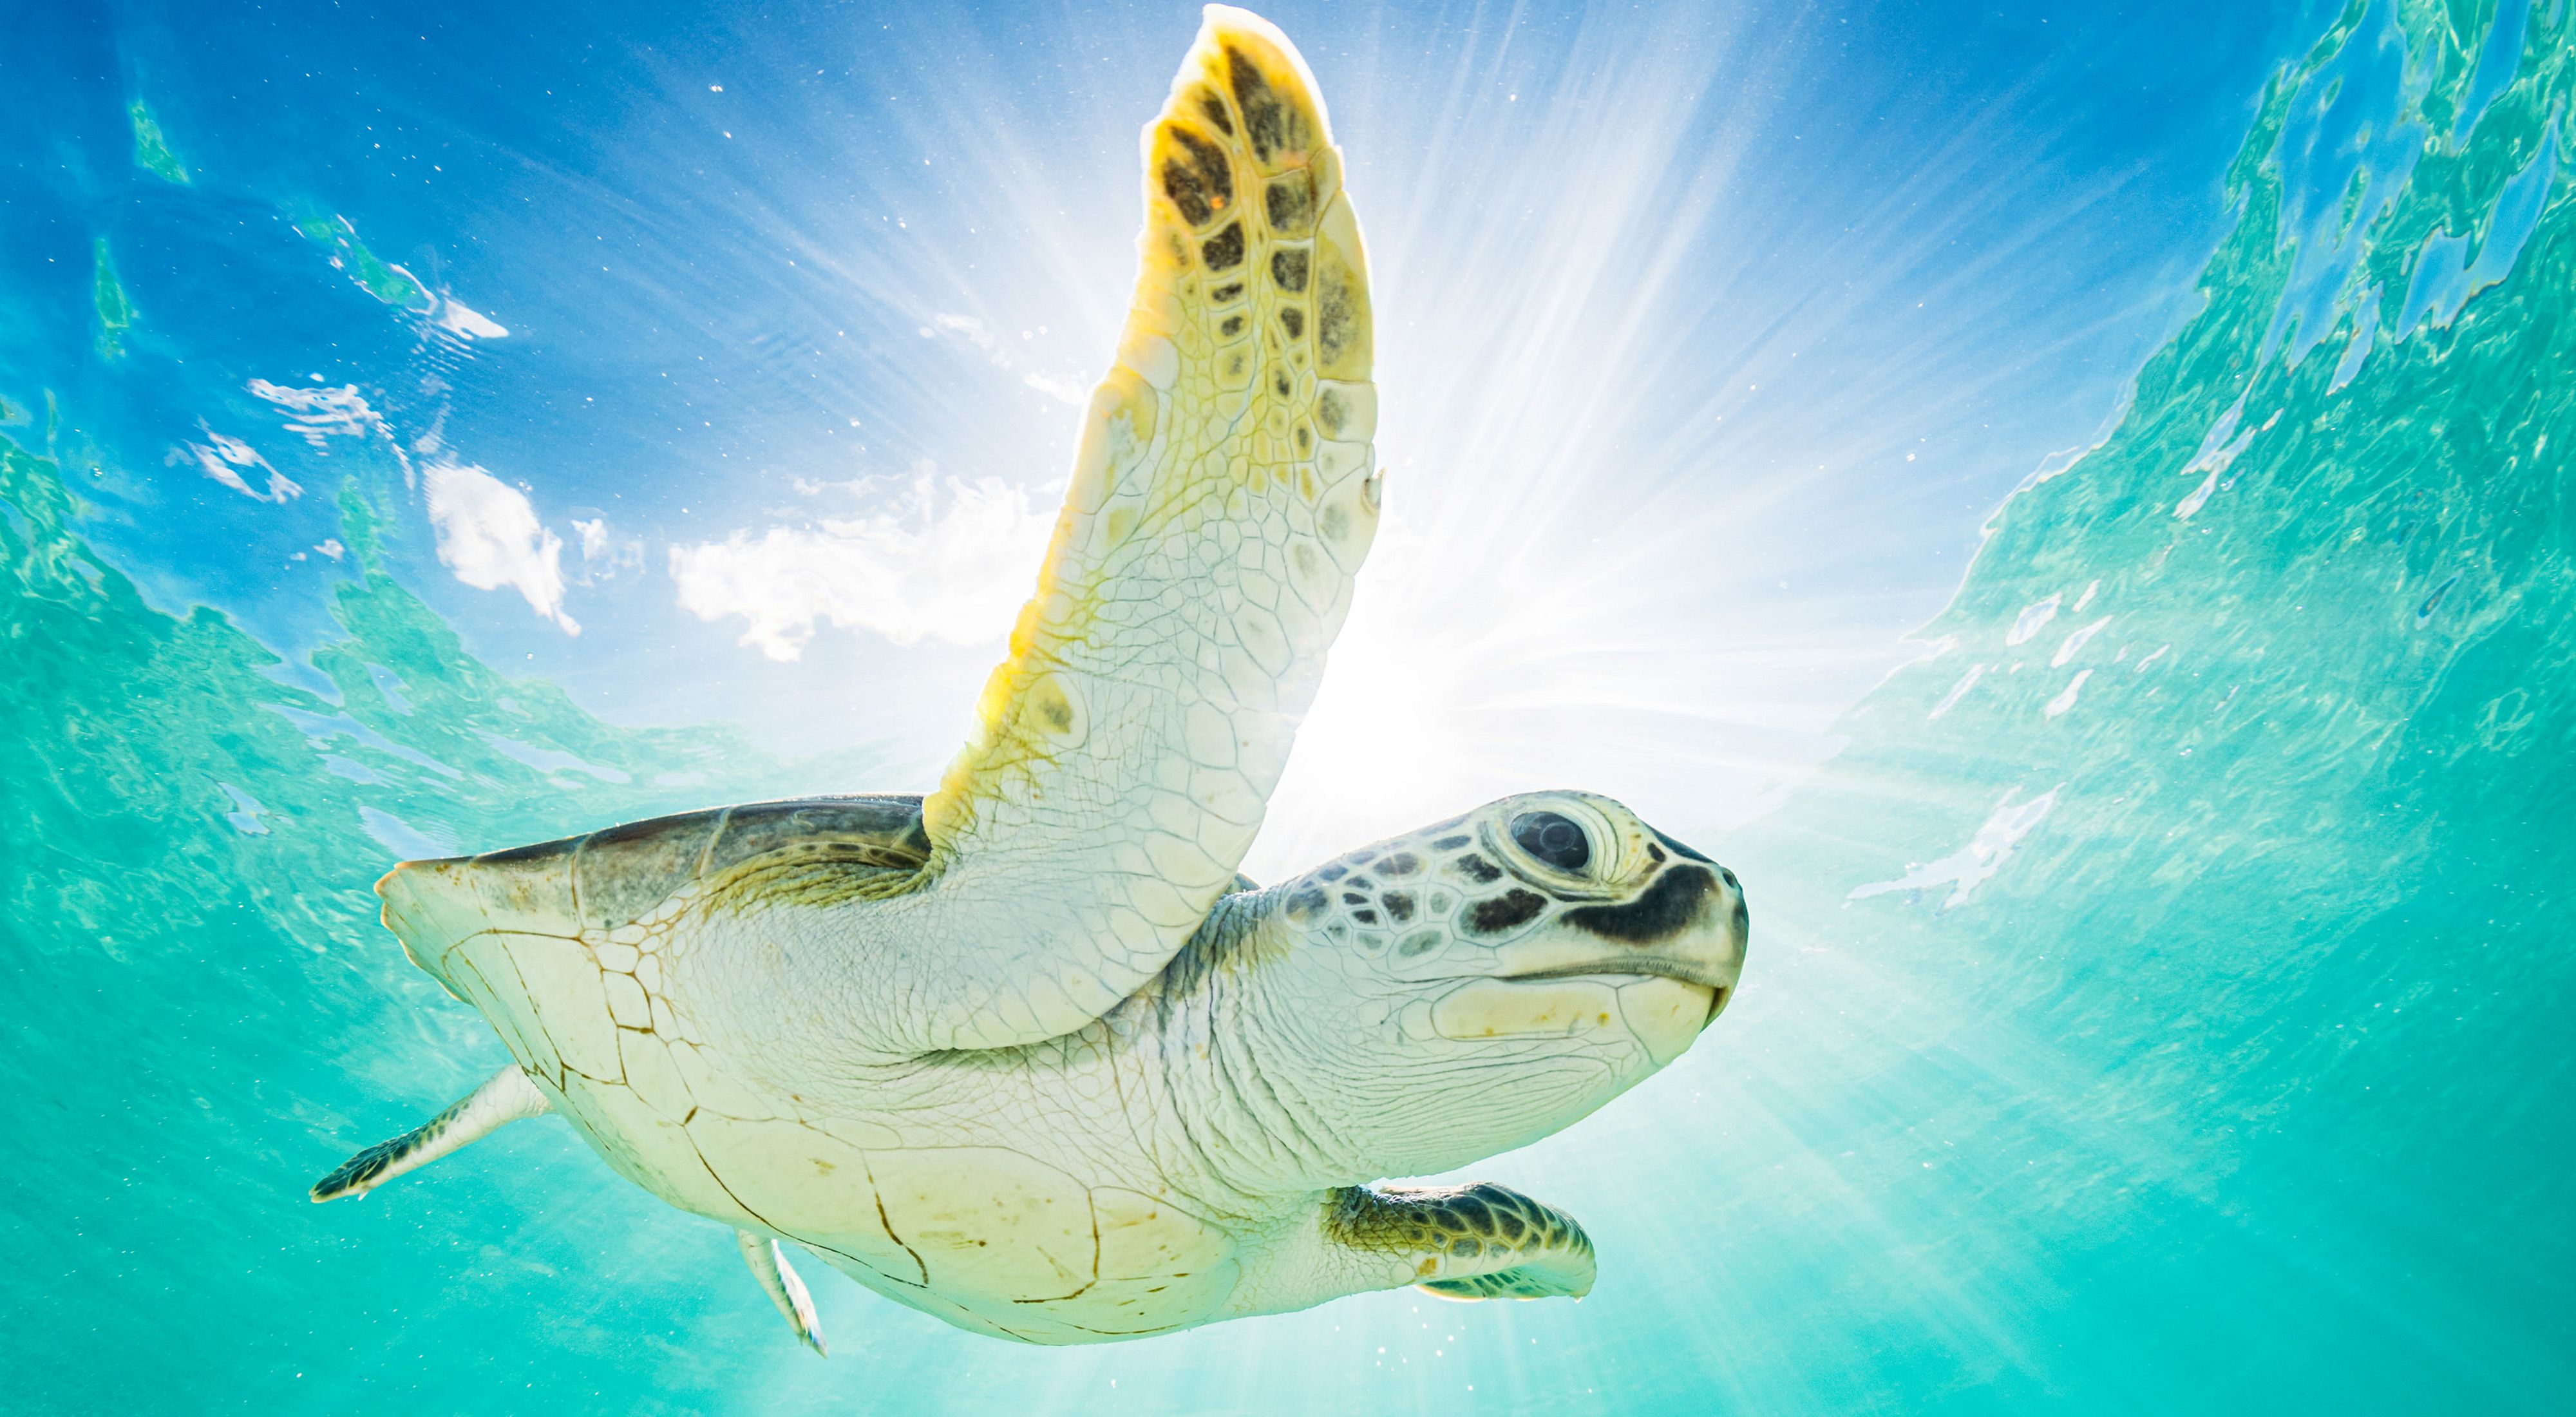 A green sea turtle swims near the surface of the ocean, with blue sky above and sunshine filtering through the water.